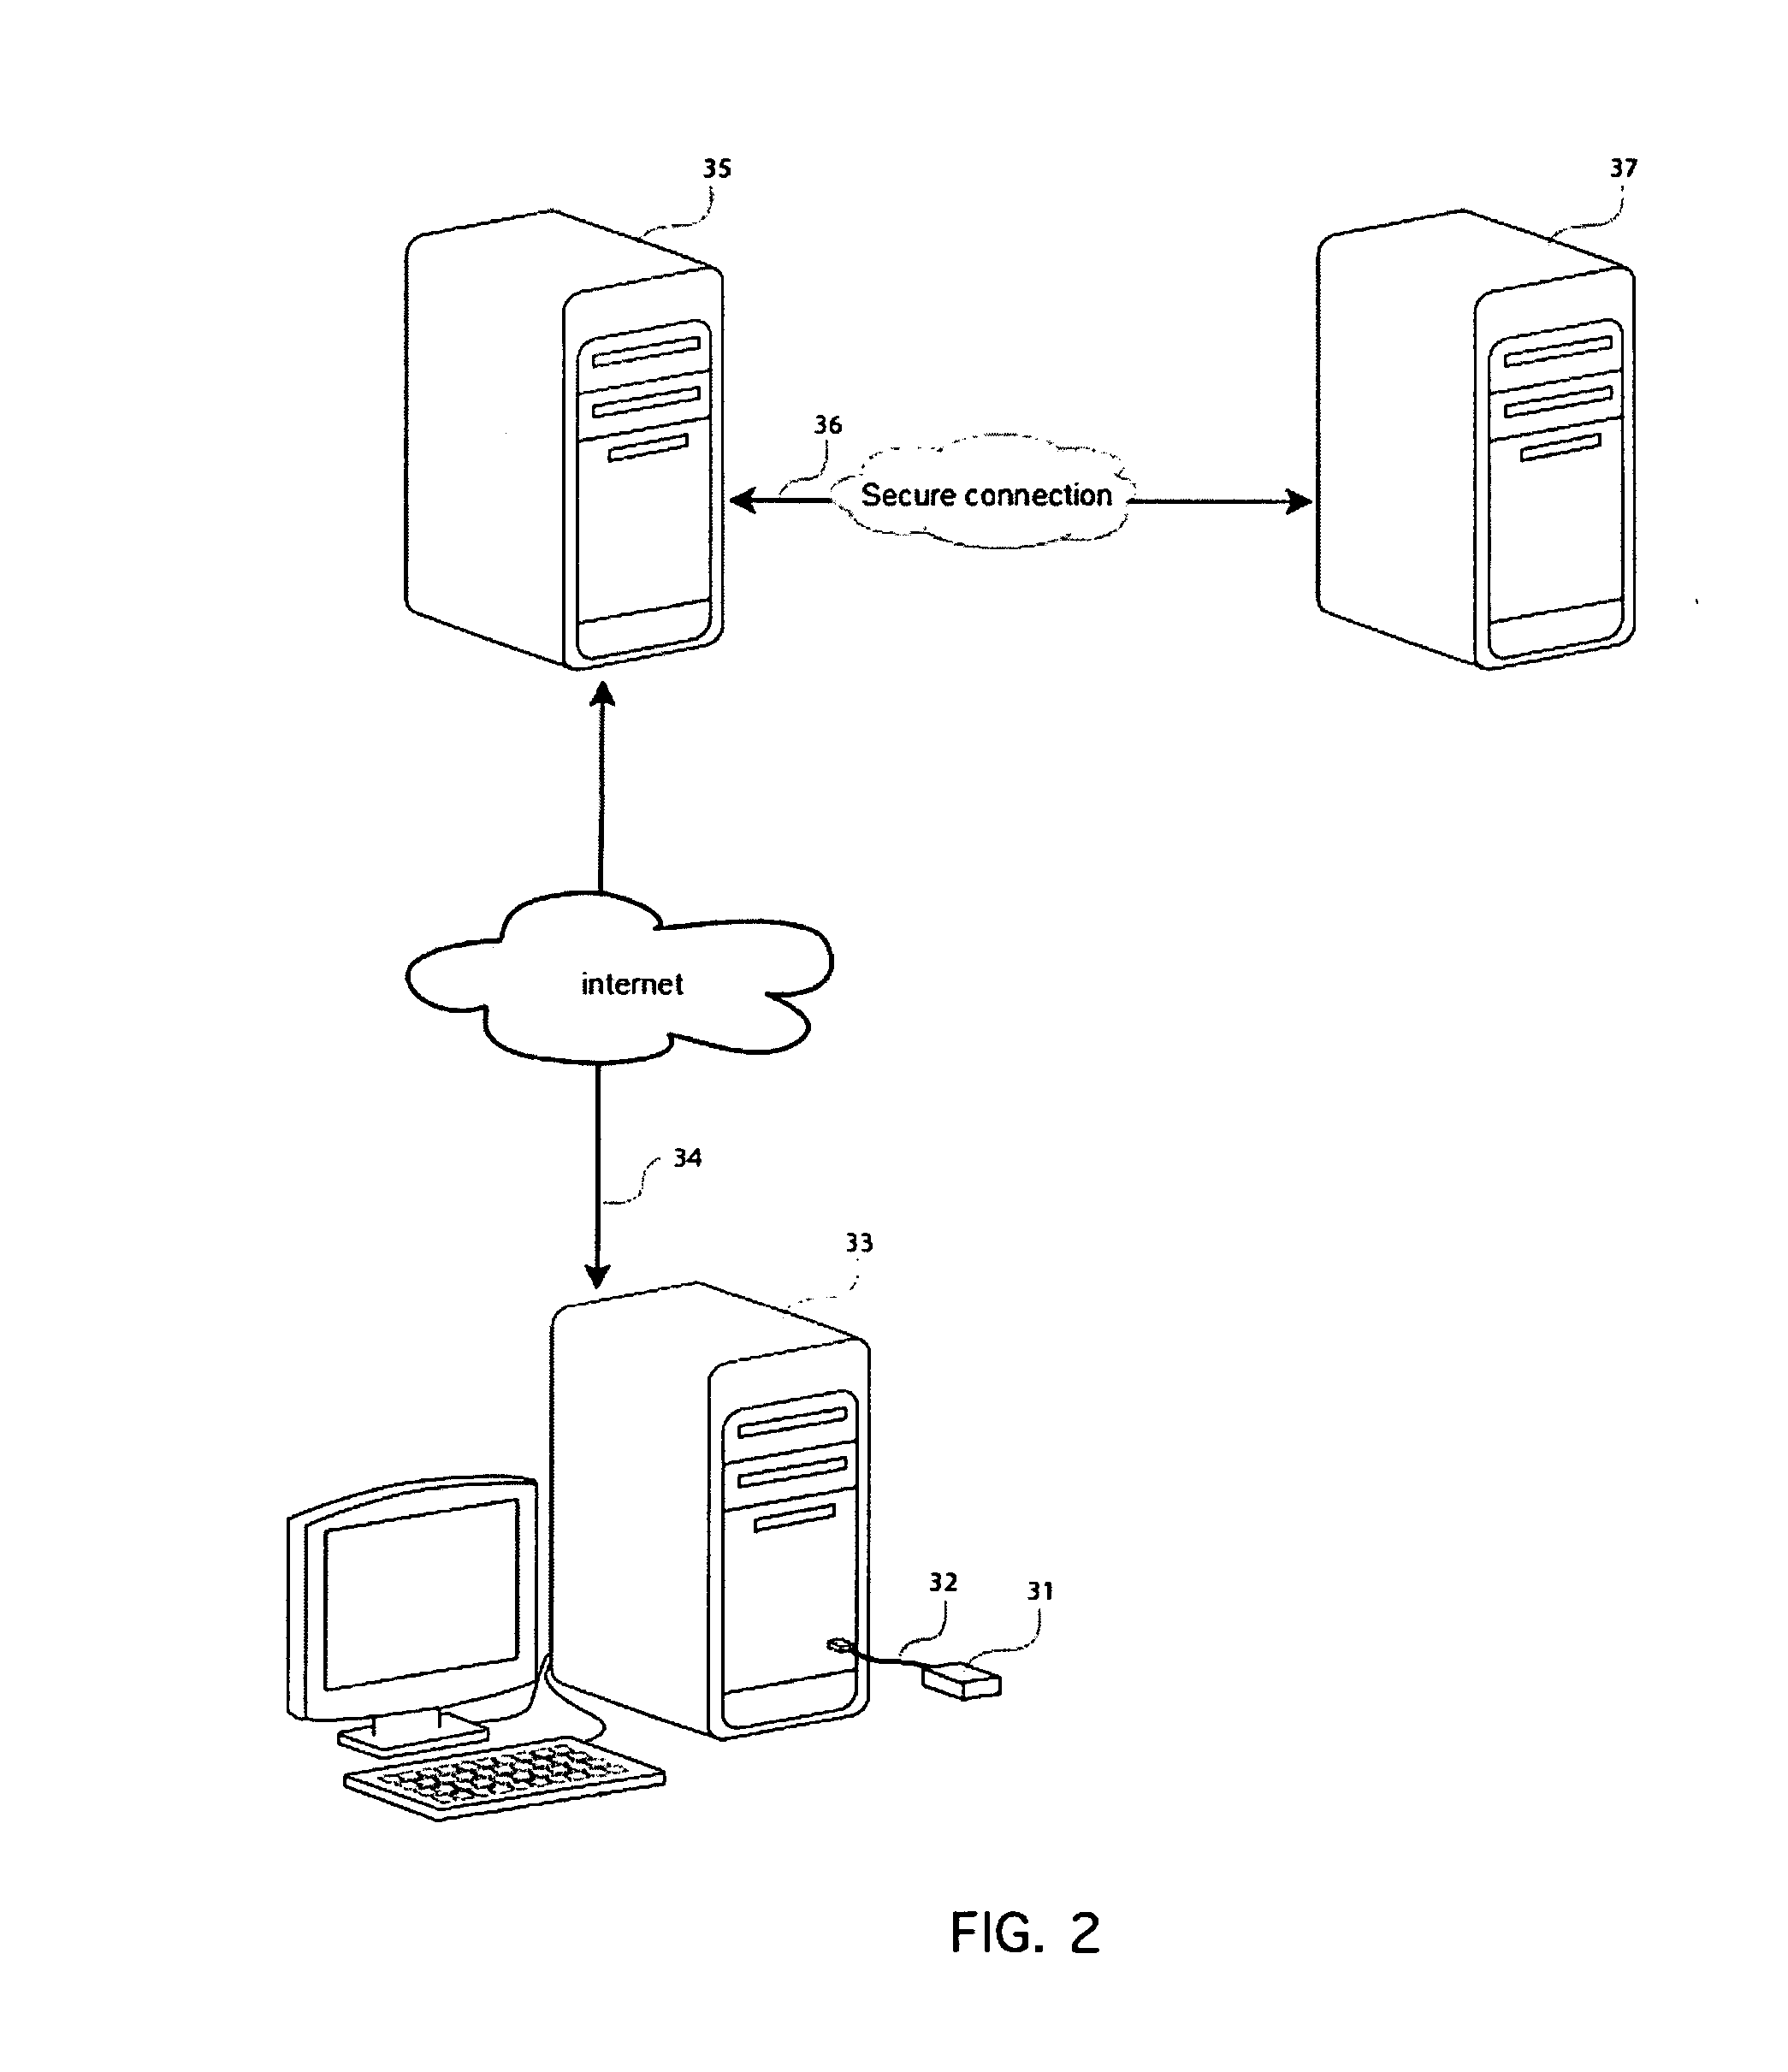 Online authentication system